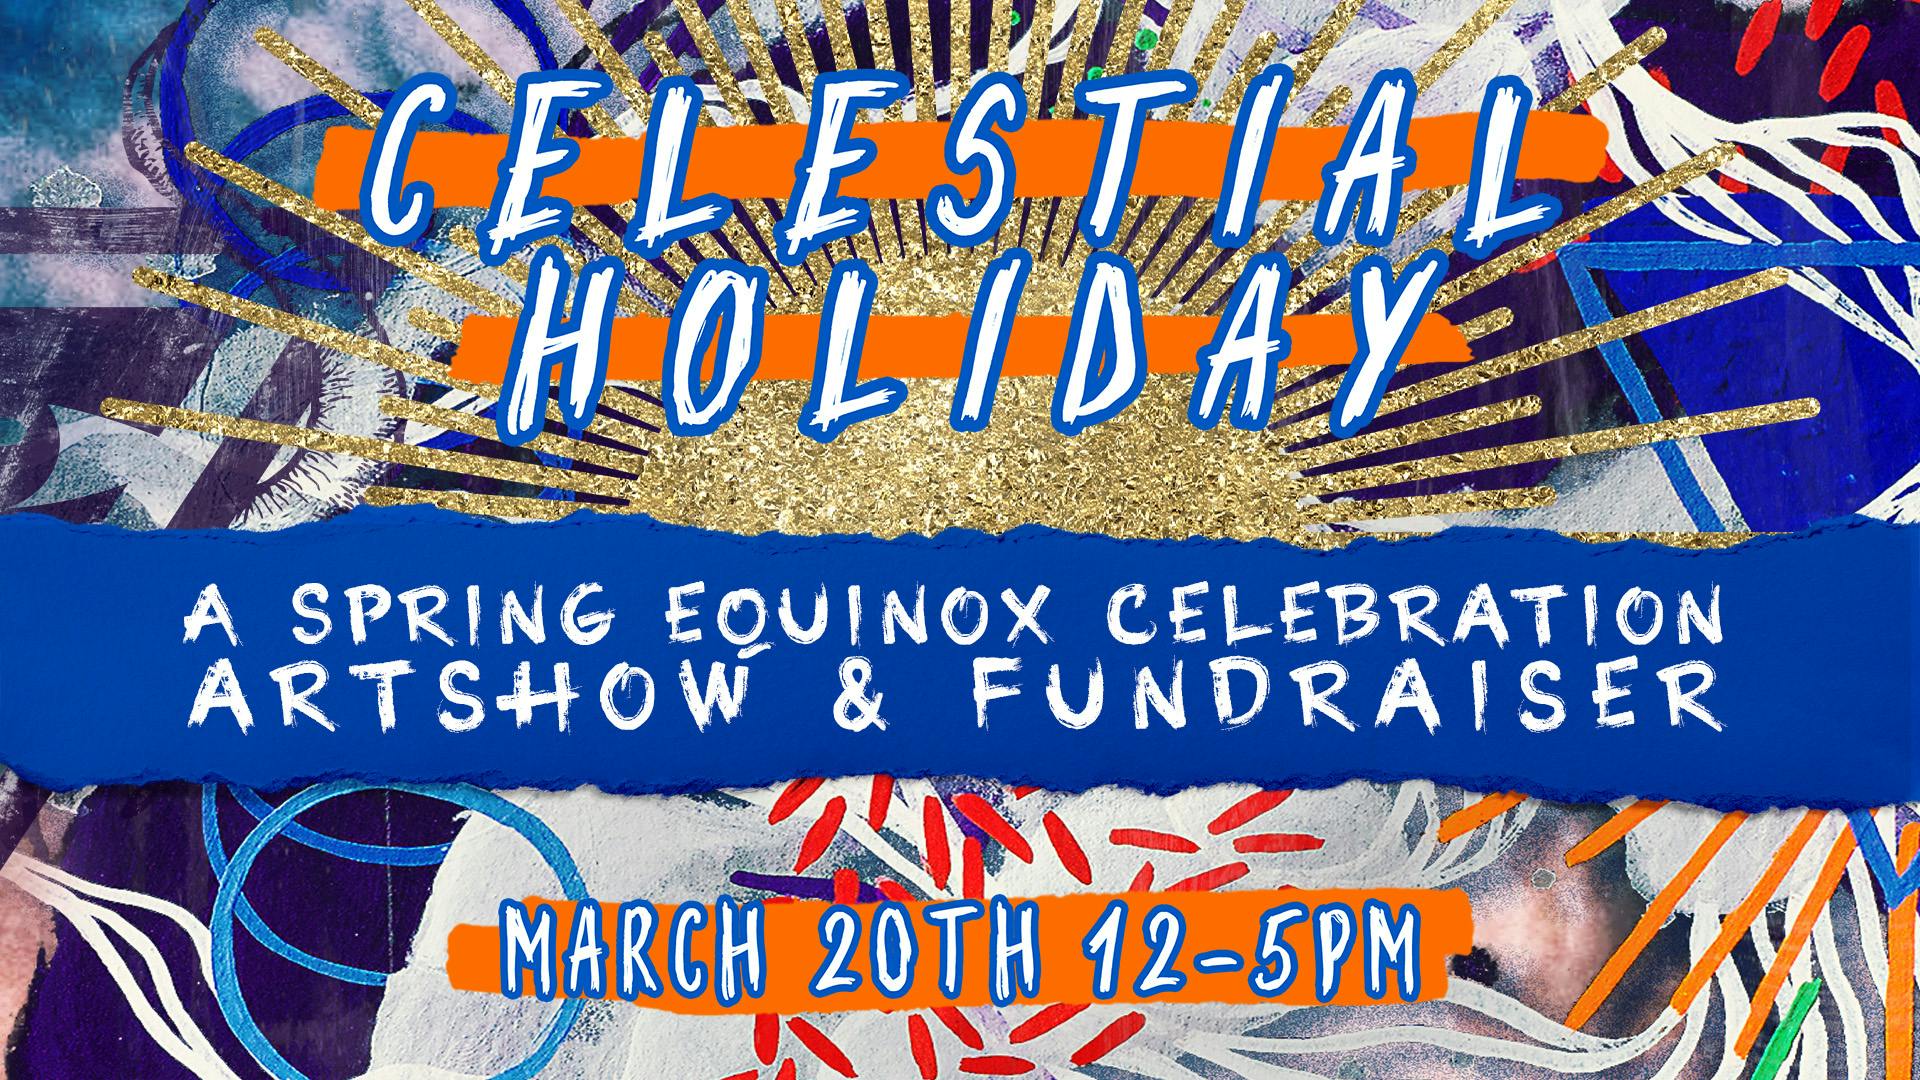 Celestial-Holiday-FB-Banner